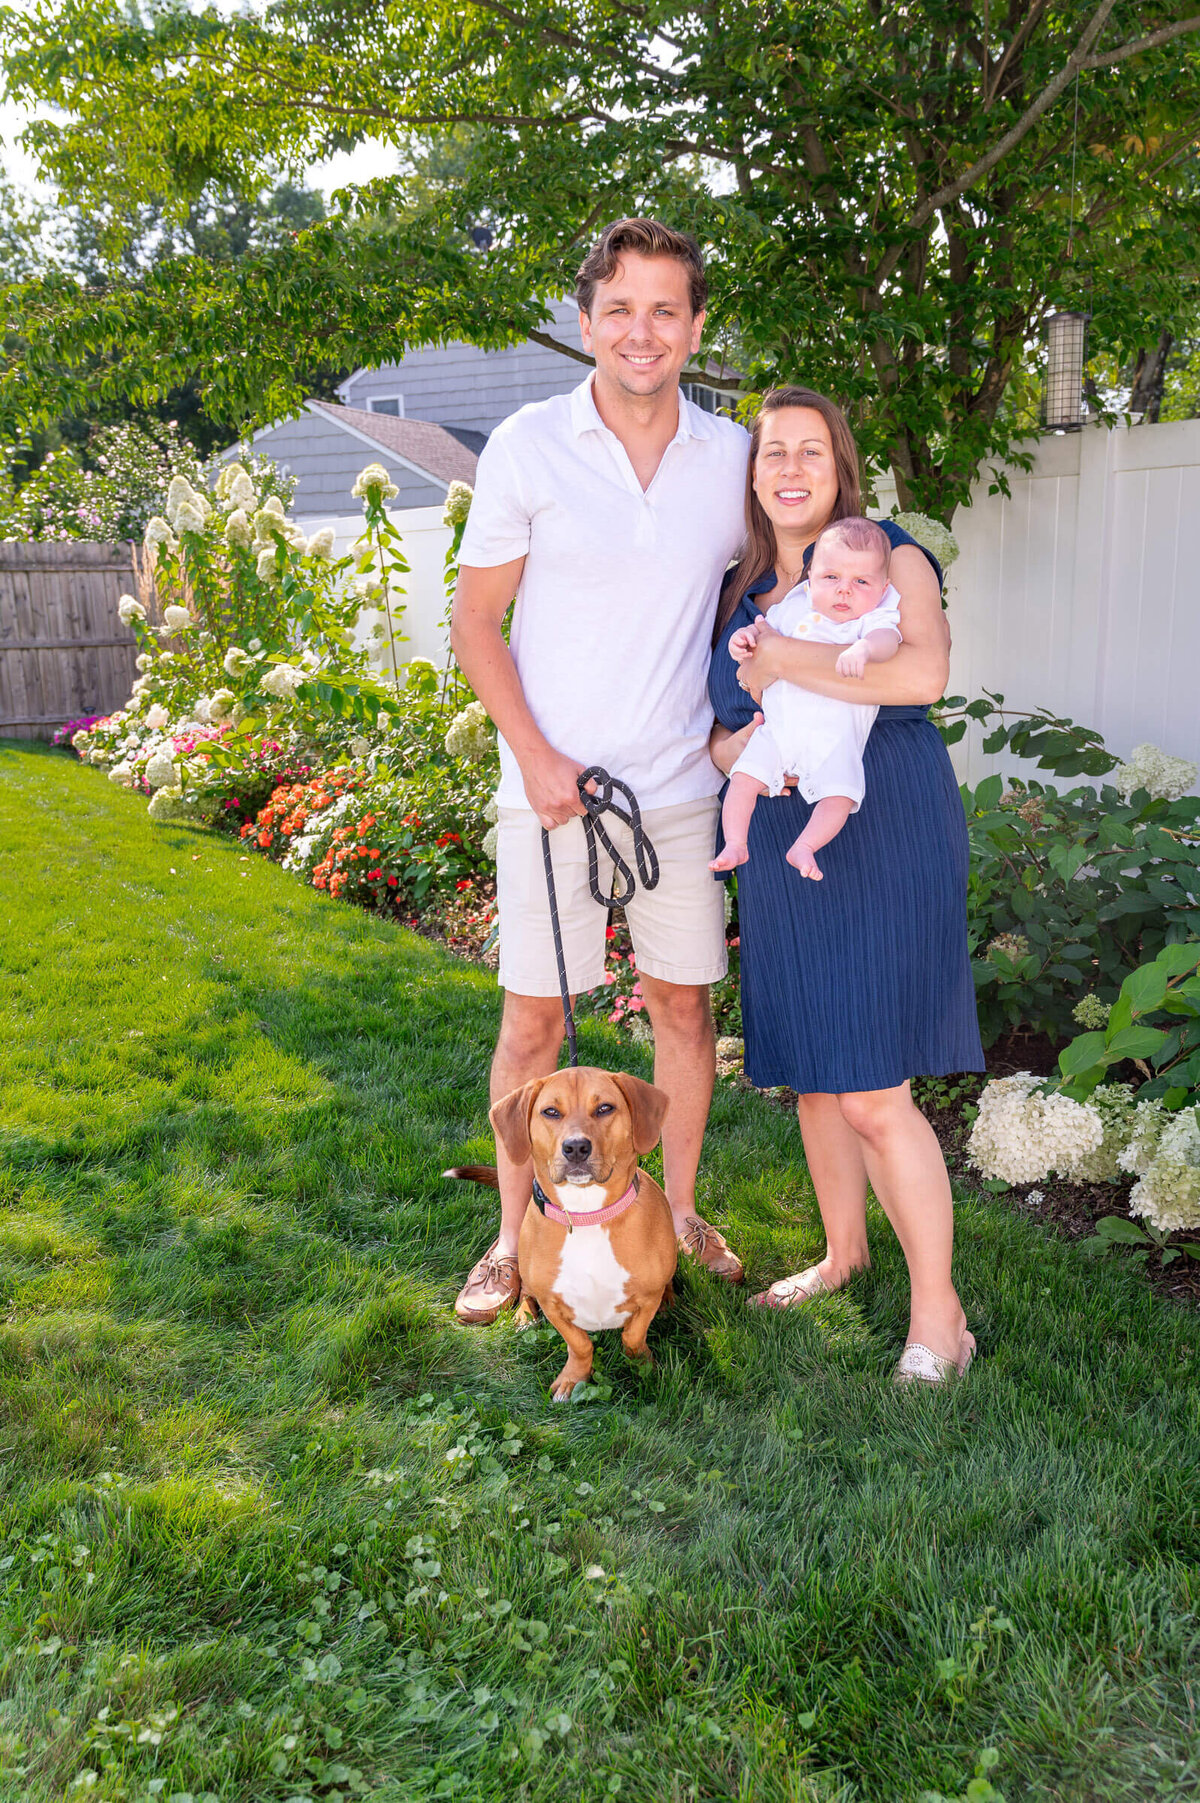 Parents with their newborn baby and dog, in their yard in Cos Cob, CT.